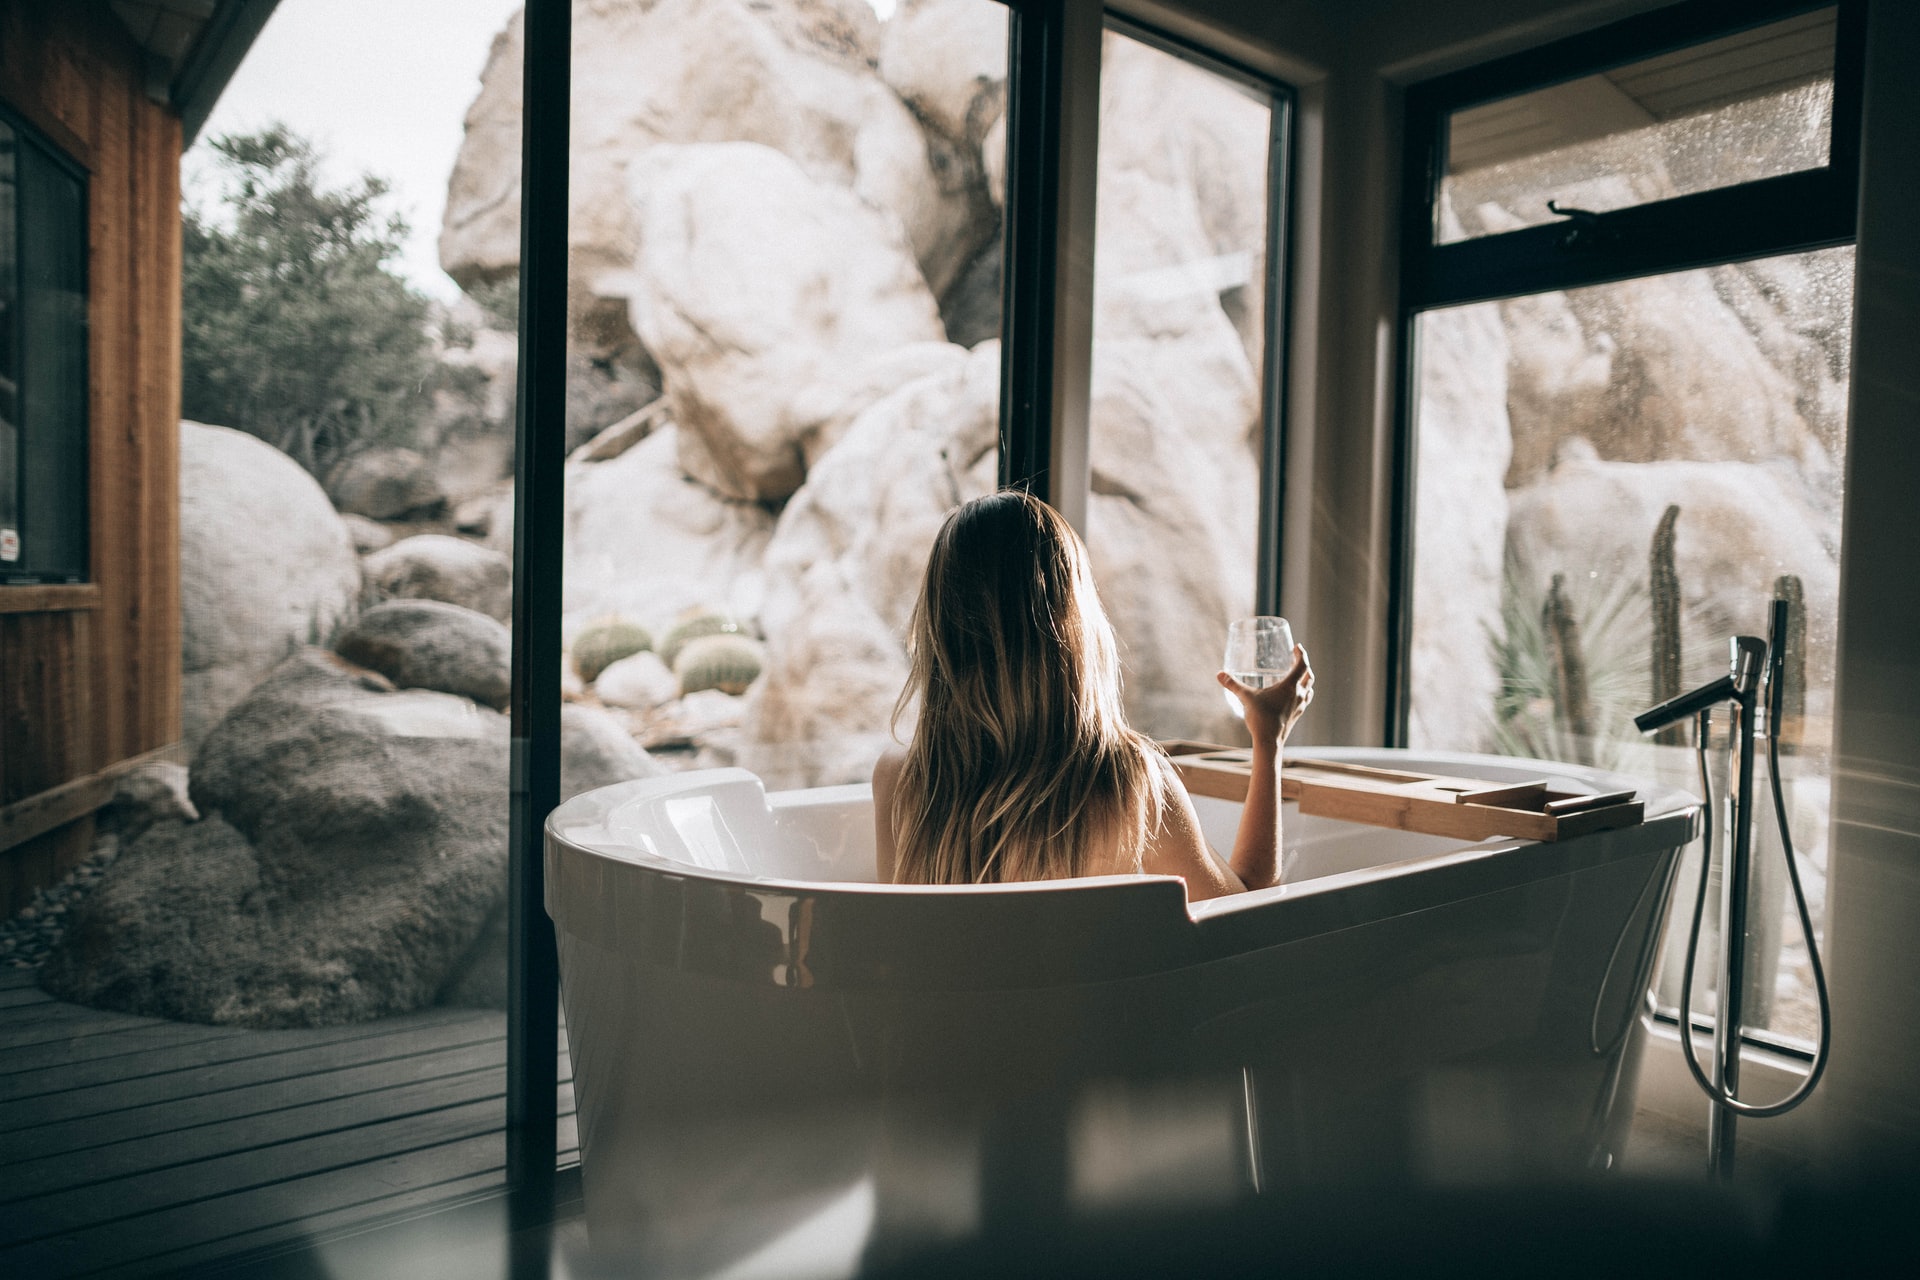 Woman takes bath with glass of wine with view of cliff face